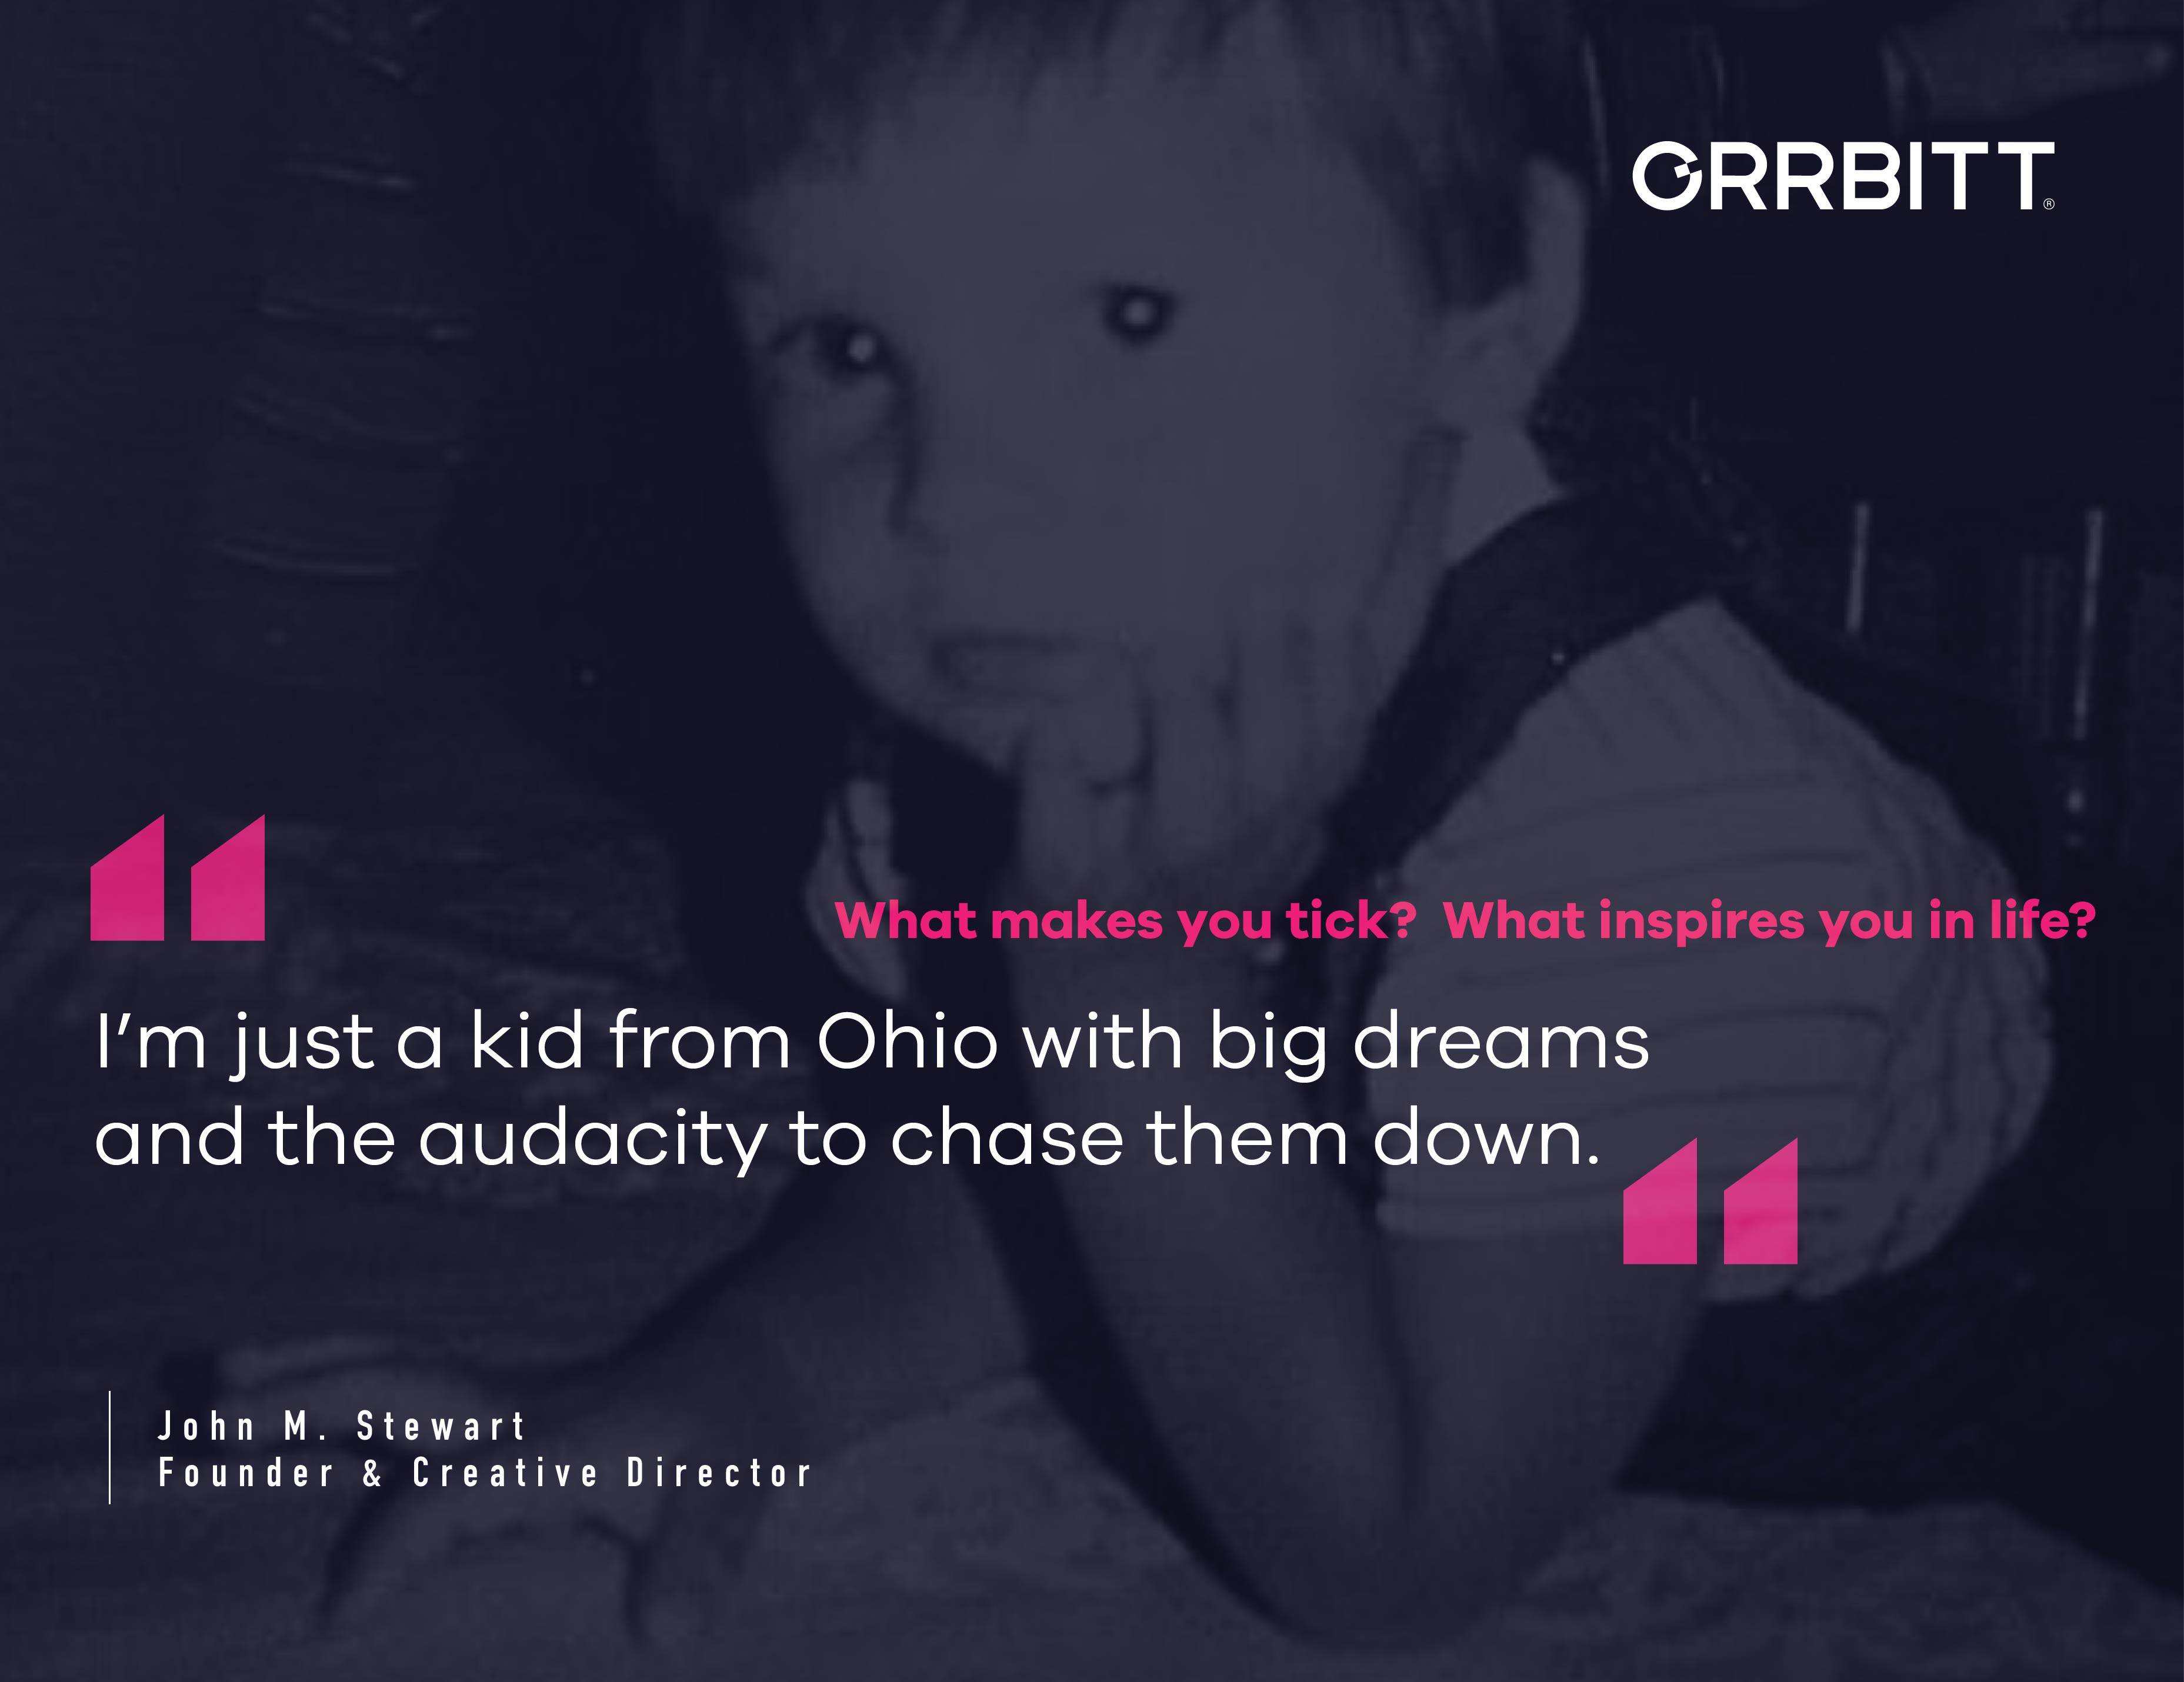 What makes you tick? What inspires you in life? "I'm just a kid from Ohio with big dreams and the audacity to chase them down" - quote from John M. Stewart, Founder & Creative Director at Orrbitt. Text over image of a baby